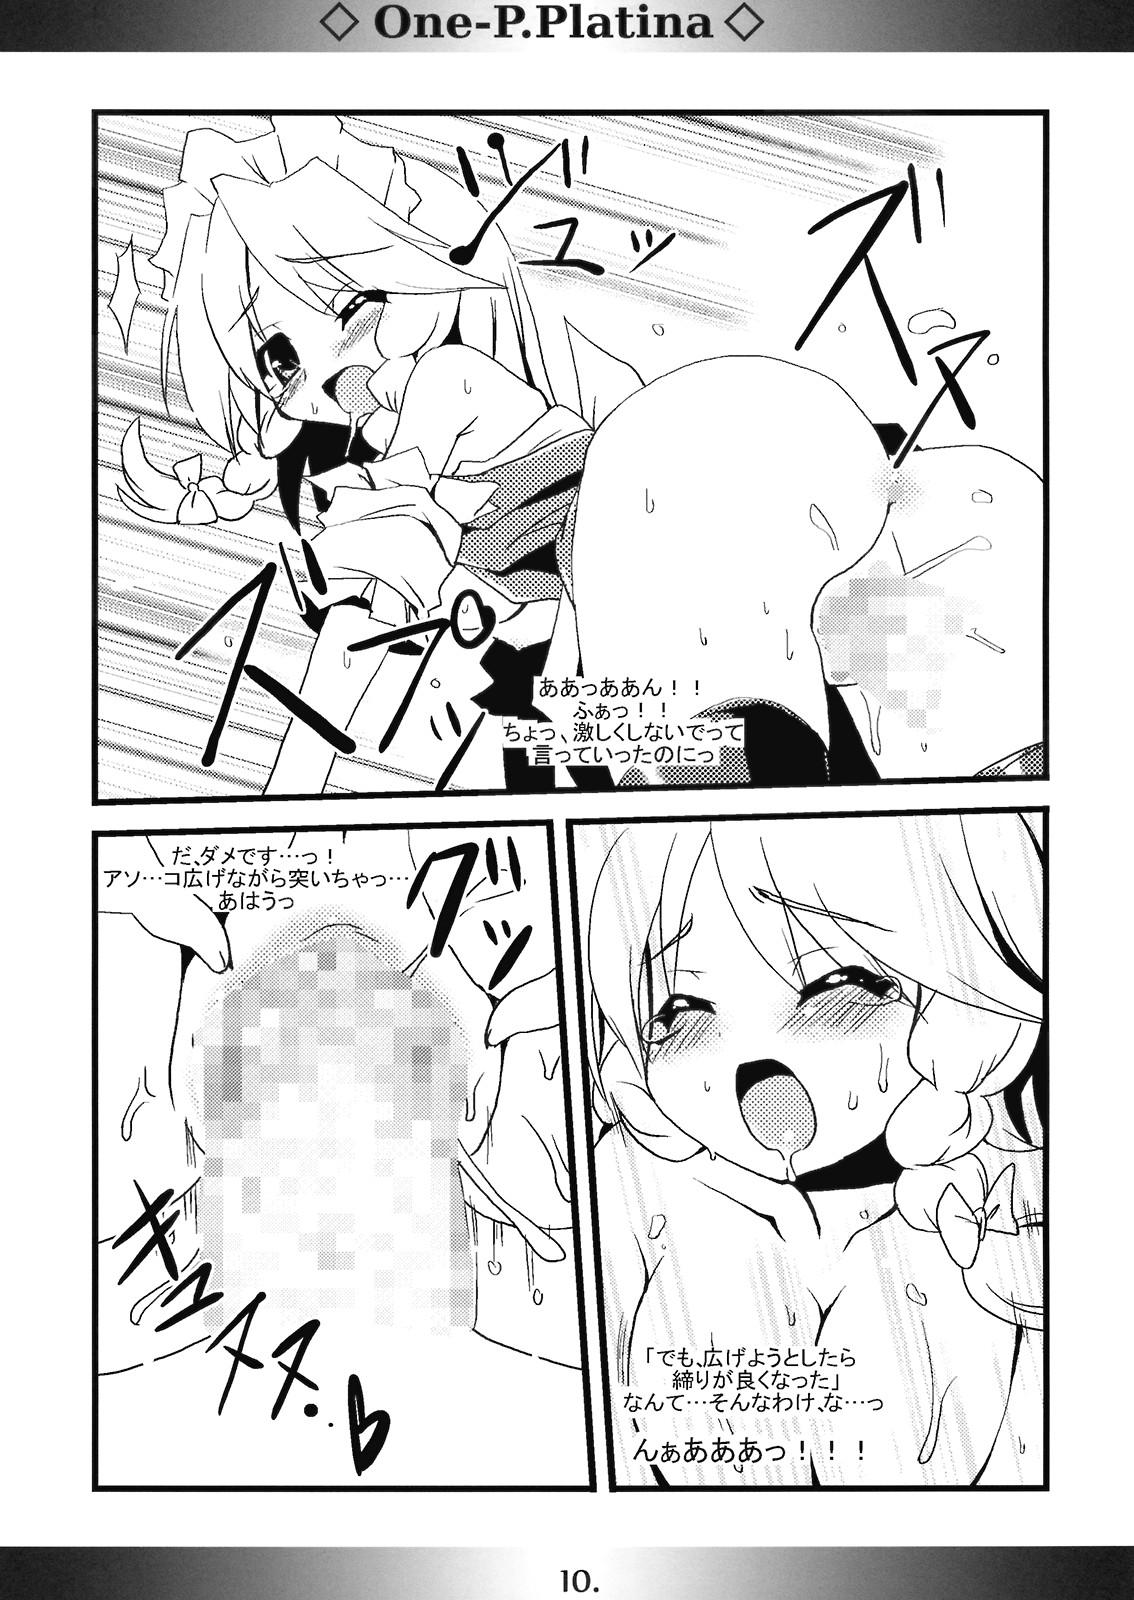 Outdoor One-P.Platina - Touhou project Submissive - Page 10